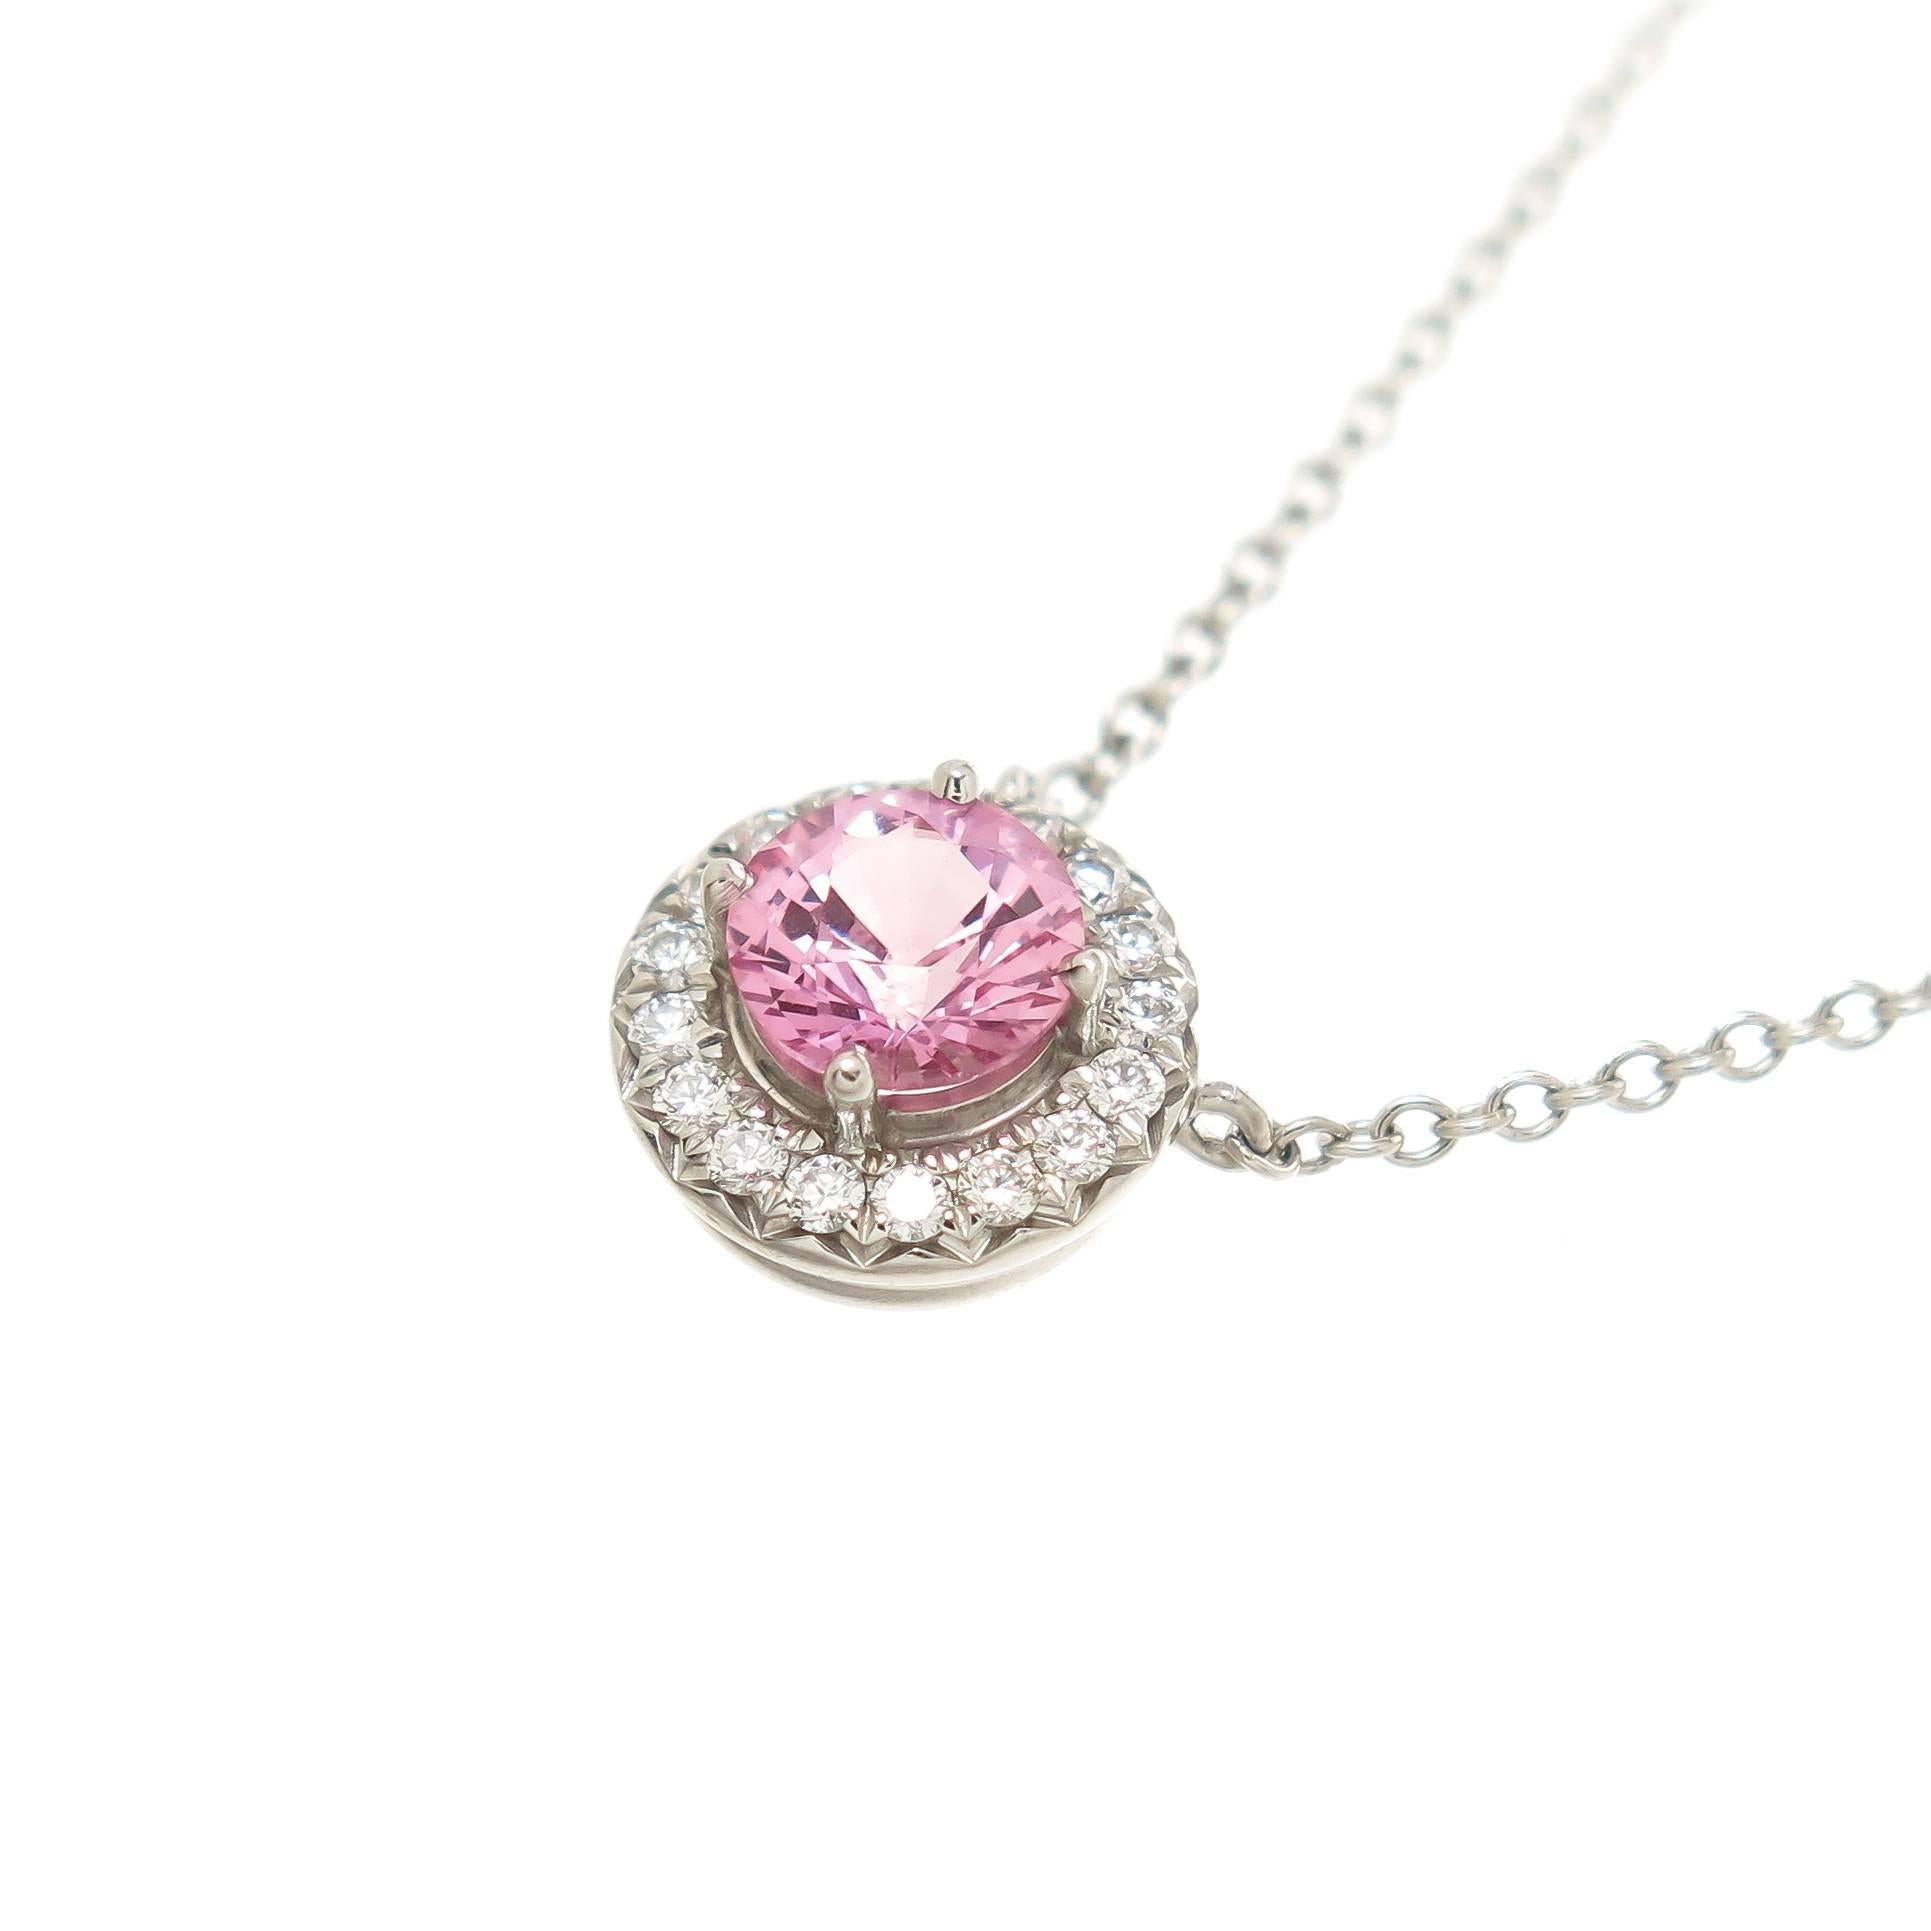 Circa 2012 Tiffany & Company Soleste Collection Platinum Pendant, set with a Very fine color .40 carat Pink Sapphire and surrounded by Round Brilliant cut Diamonds totaling .09 Ct. Suspended from a 16 inch Platinum chain. Comes in the original